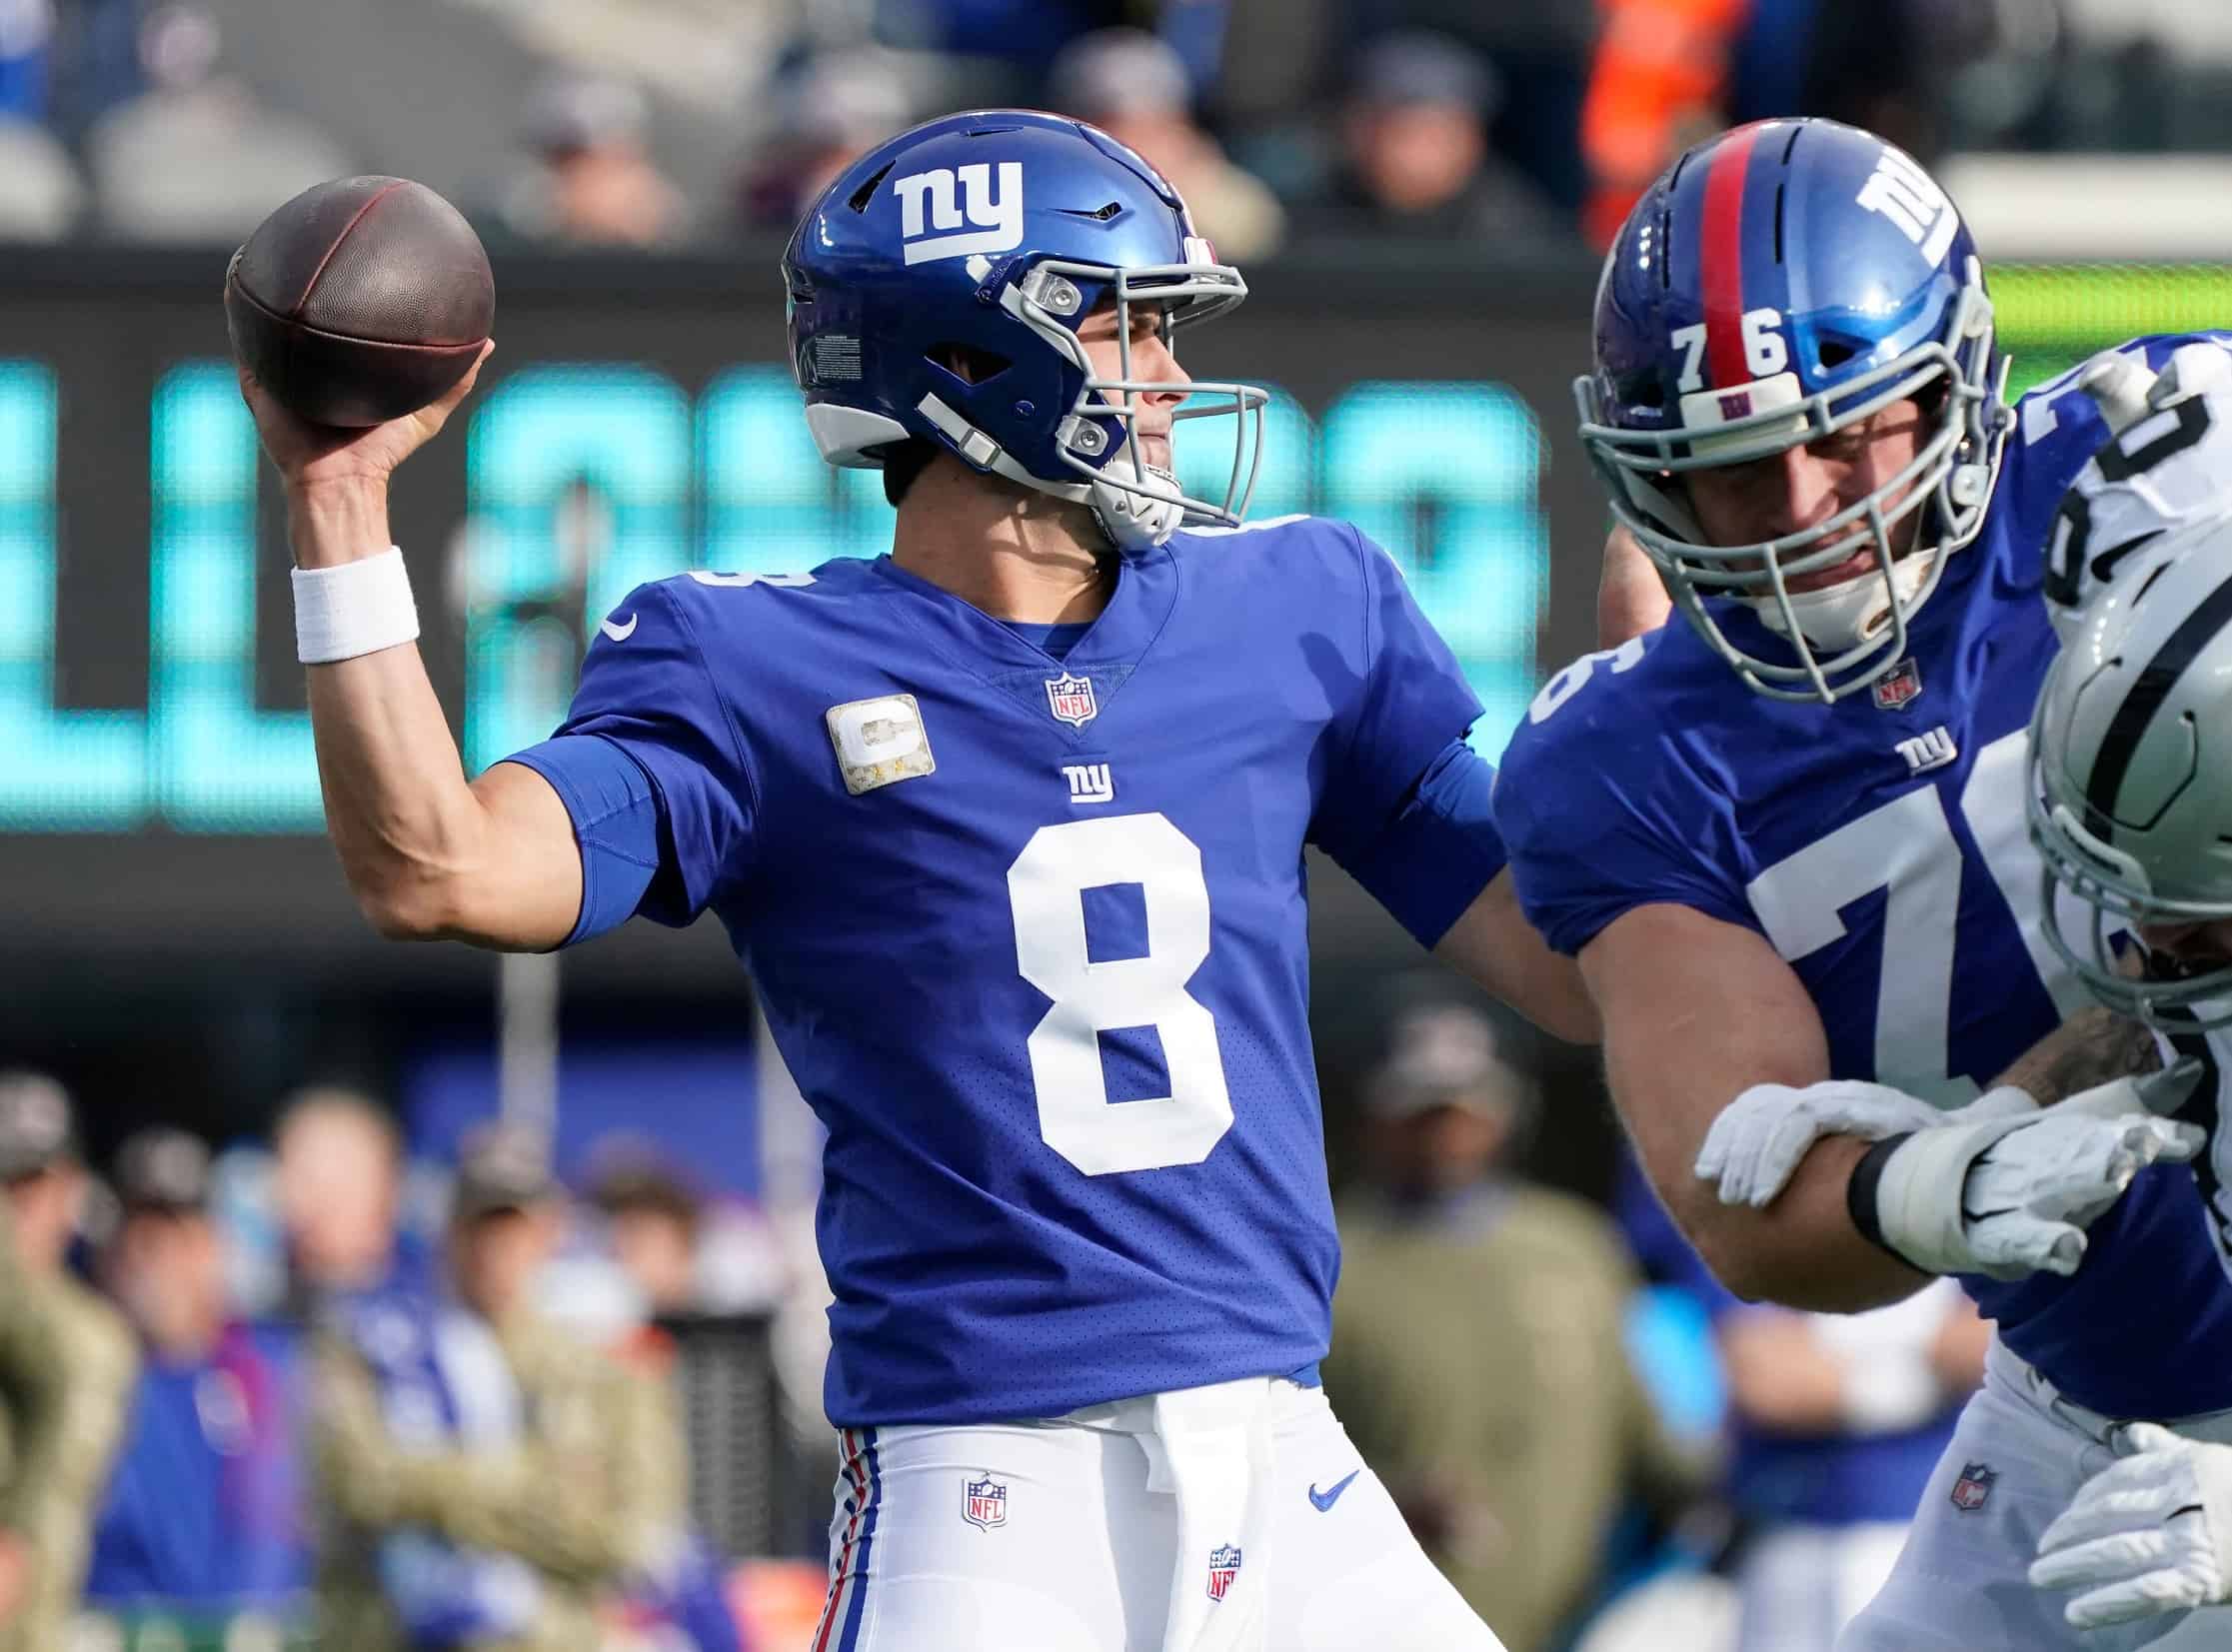 Why isn't Daniel Jones playing today vs. the Dolphins?